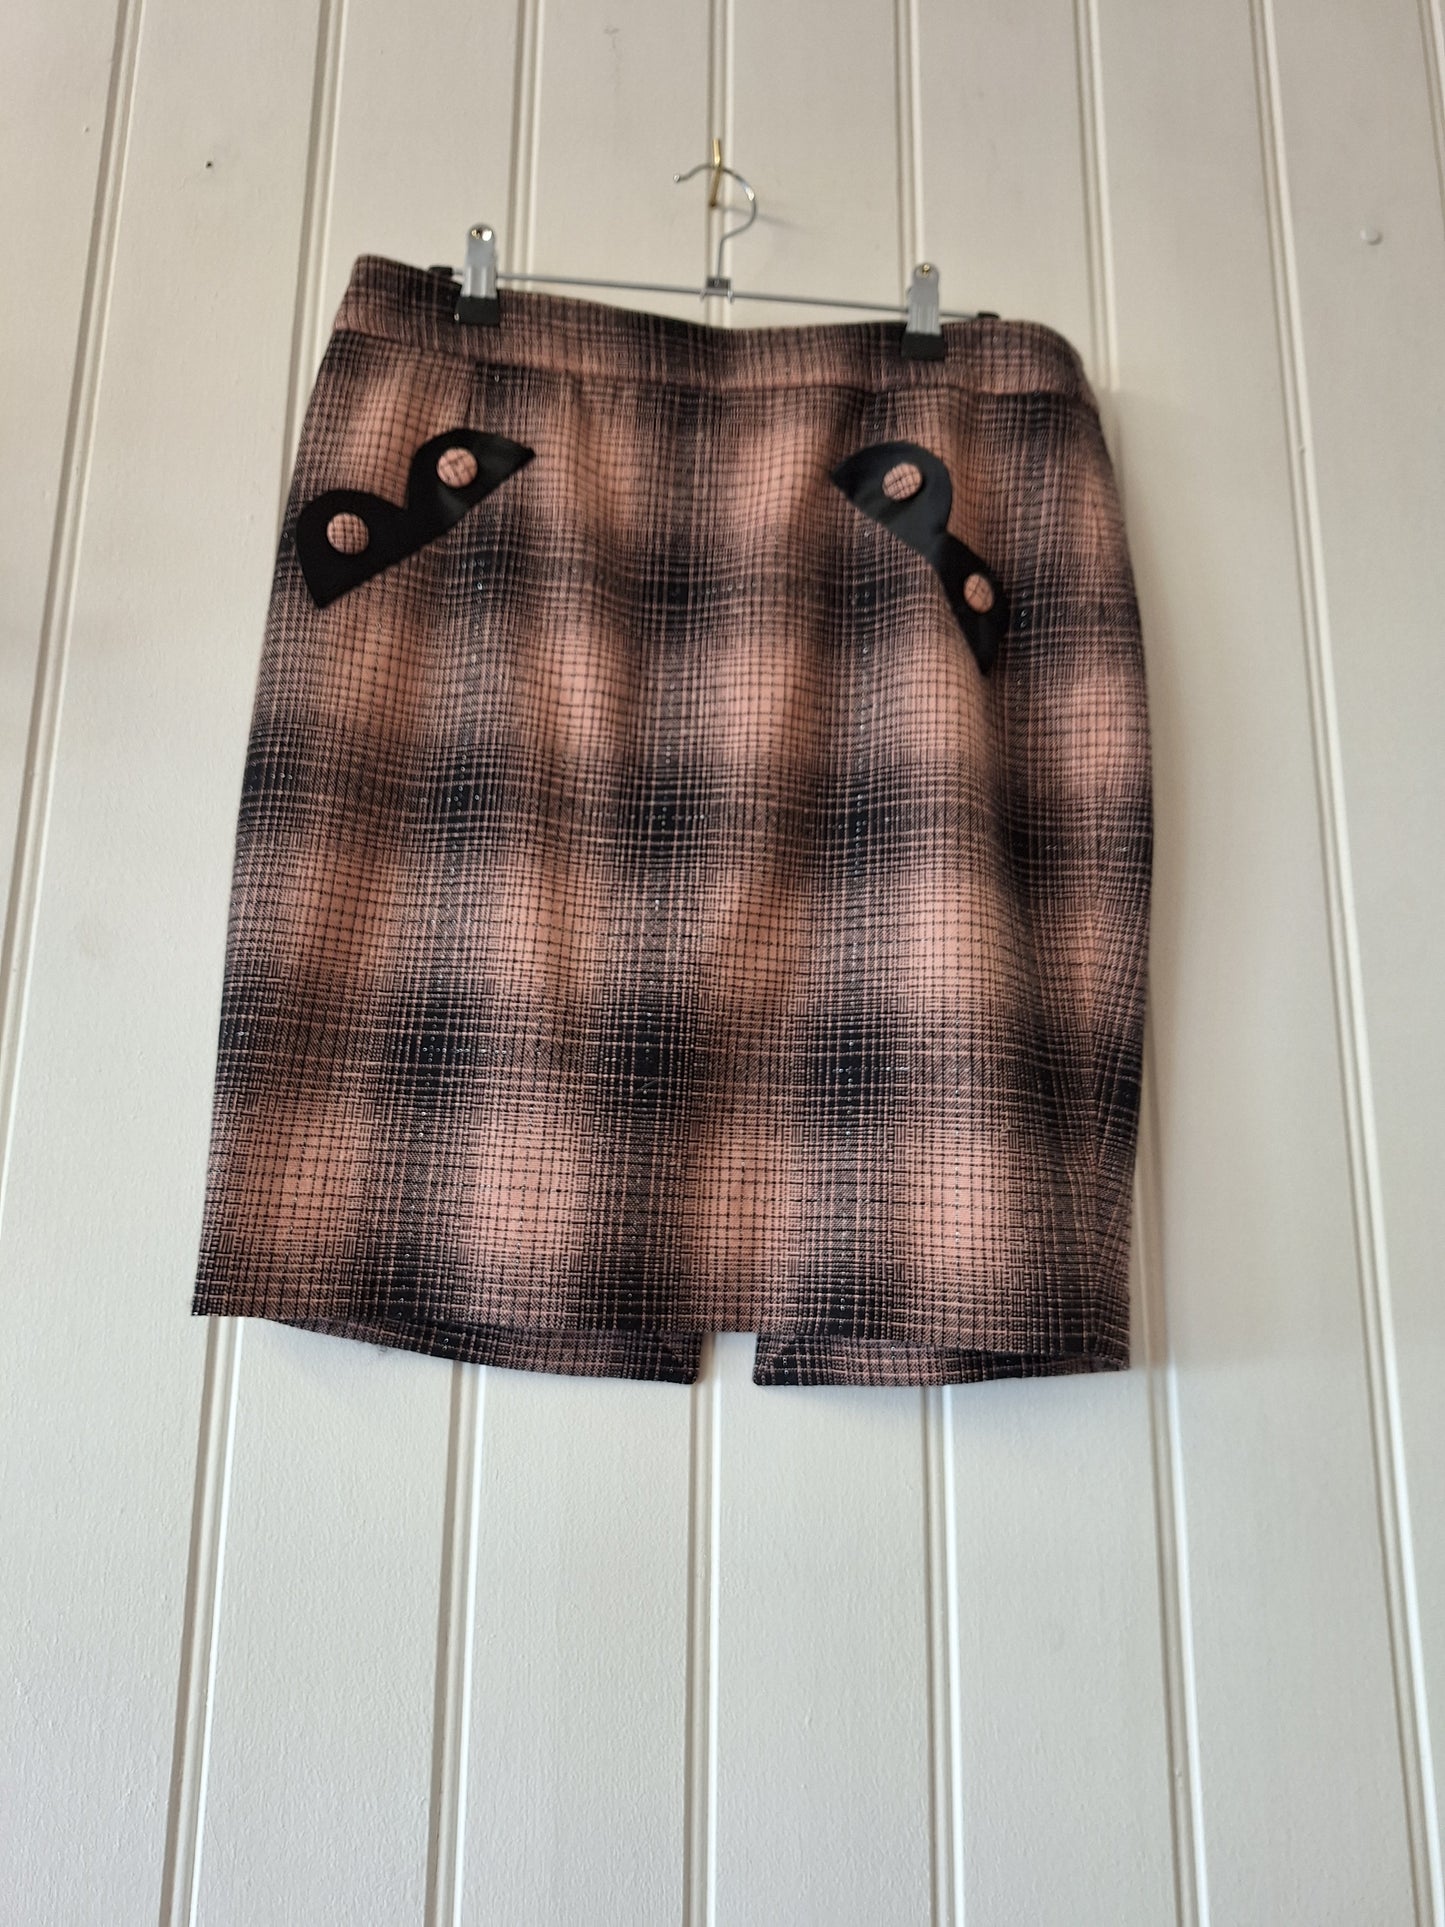 Marc Jacobs black and pink skirt 8